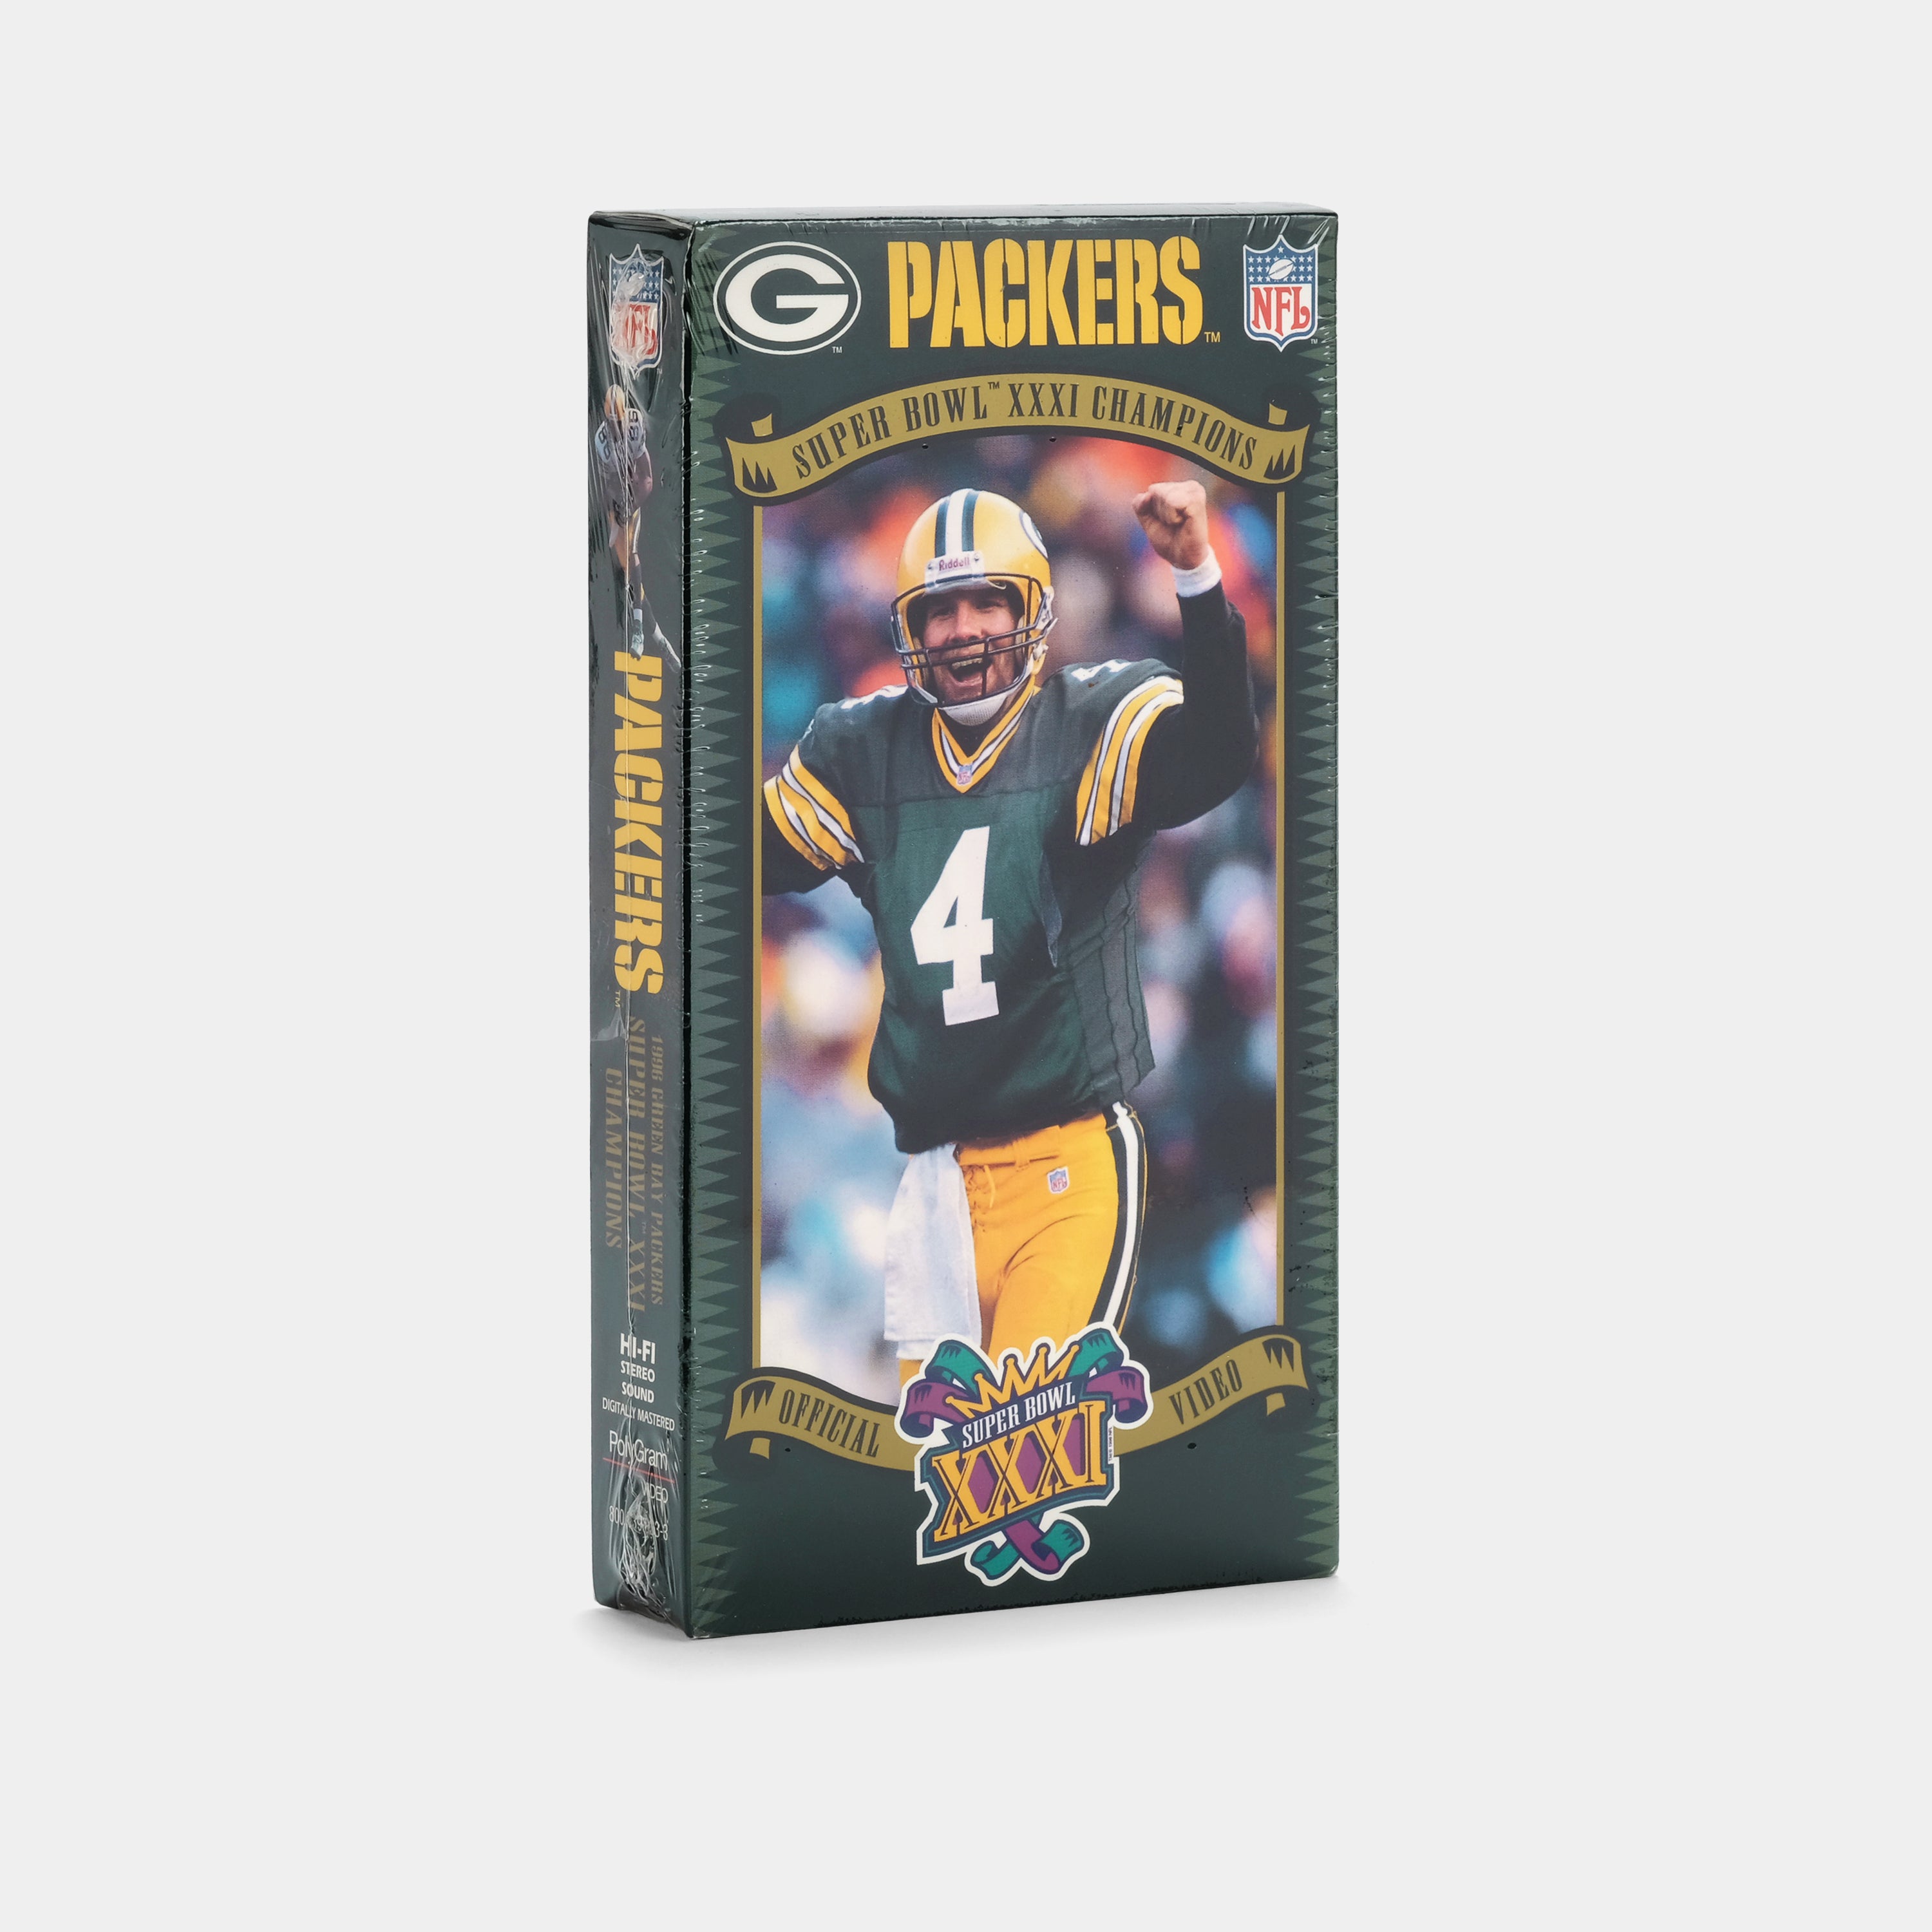 Green Bay Packers: Super Bowl XXXI Champions (Sealed) VHS Tape